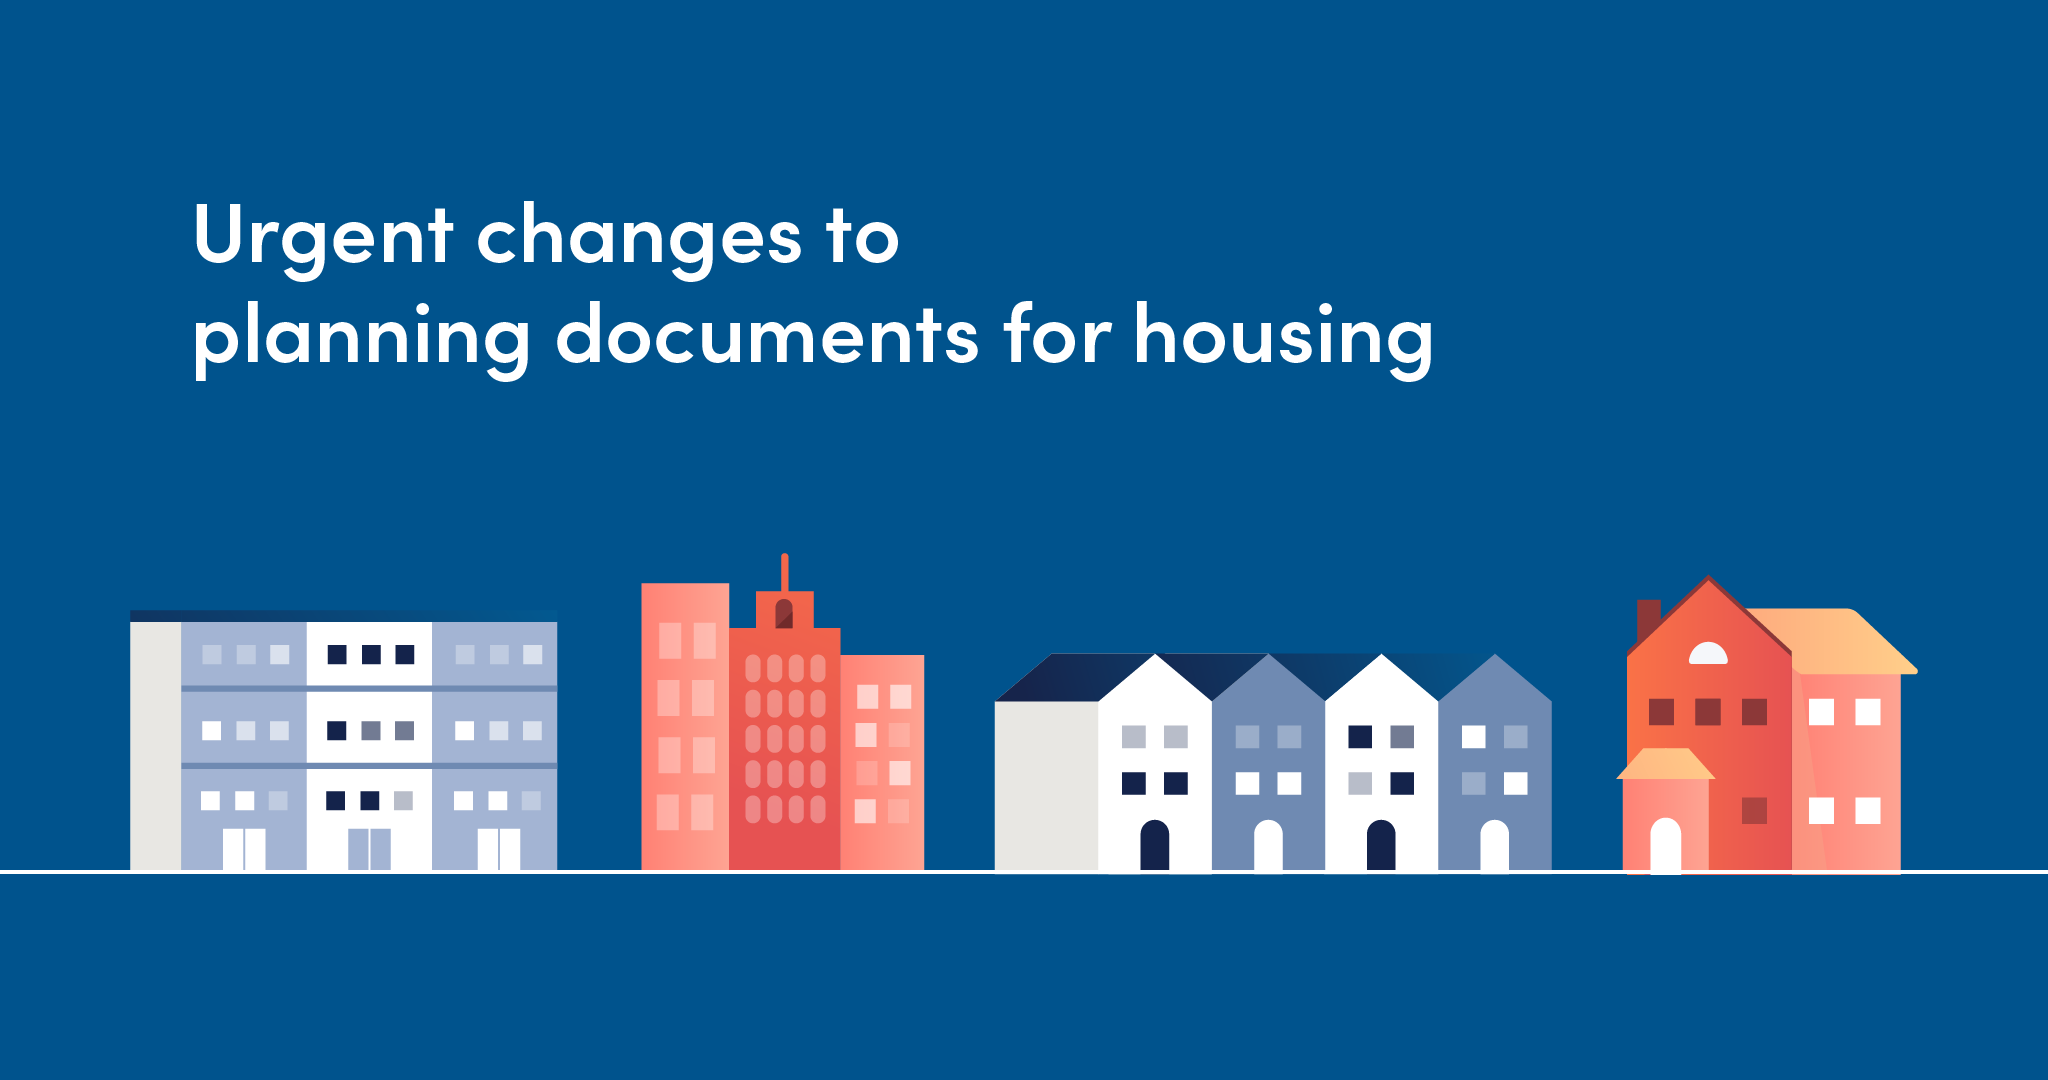 a graphic of four multi-unit buildings against a royal blue background with text that says "urgent changes to planning documents for housing"